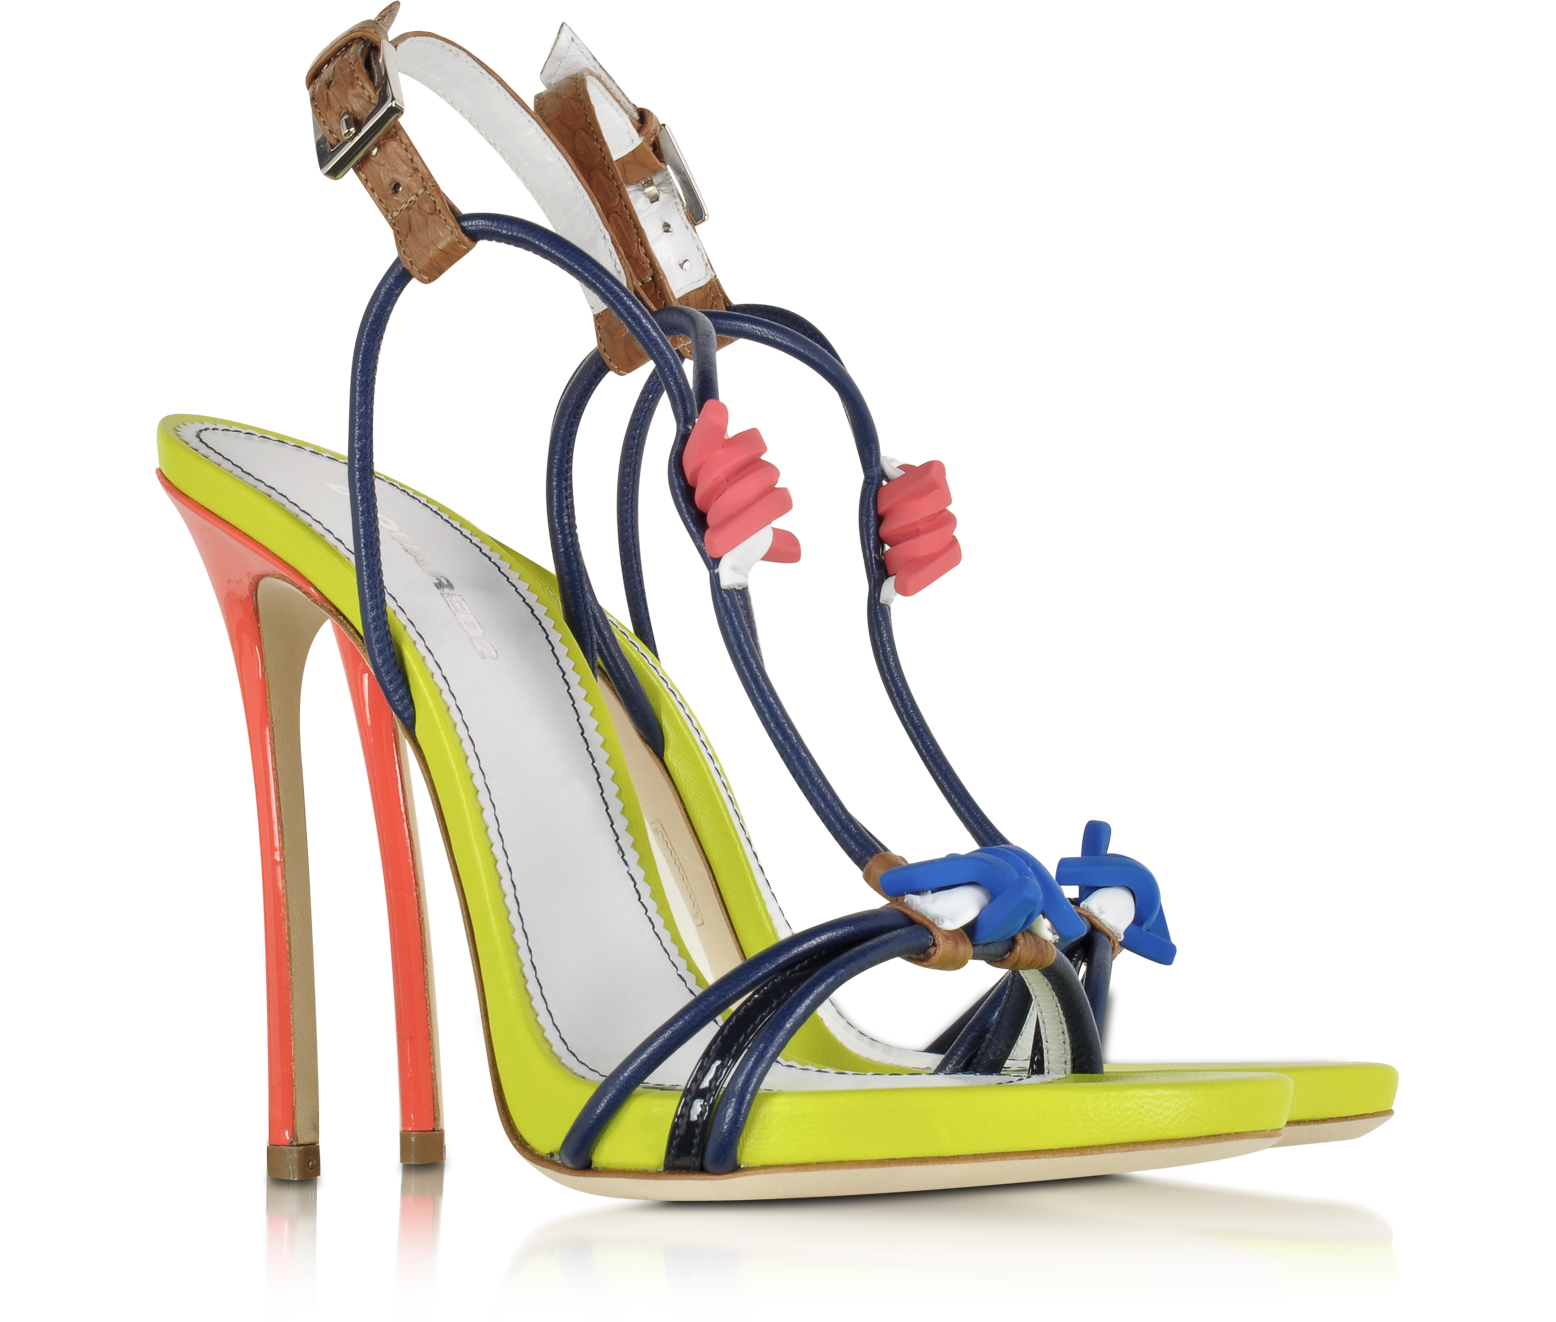 DSquared2 Babe Wire Multicolor Leather Sandal 36 IT/EU at FORZIERI